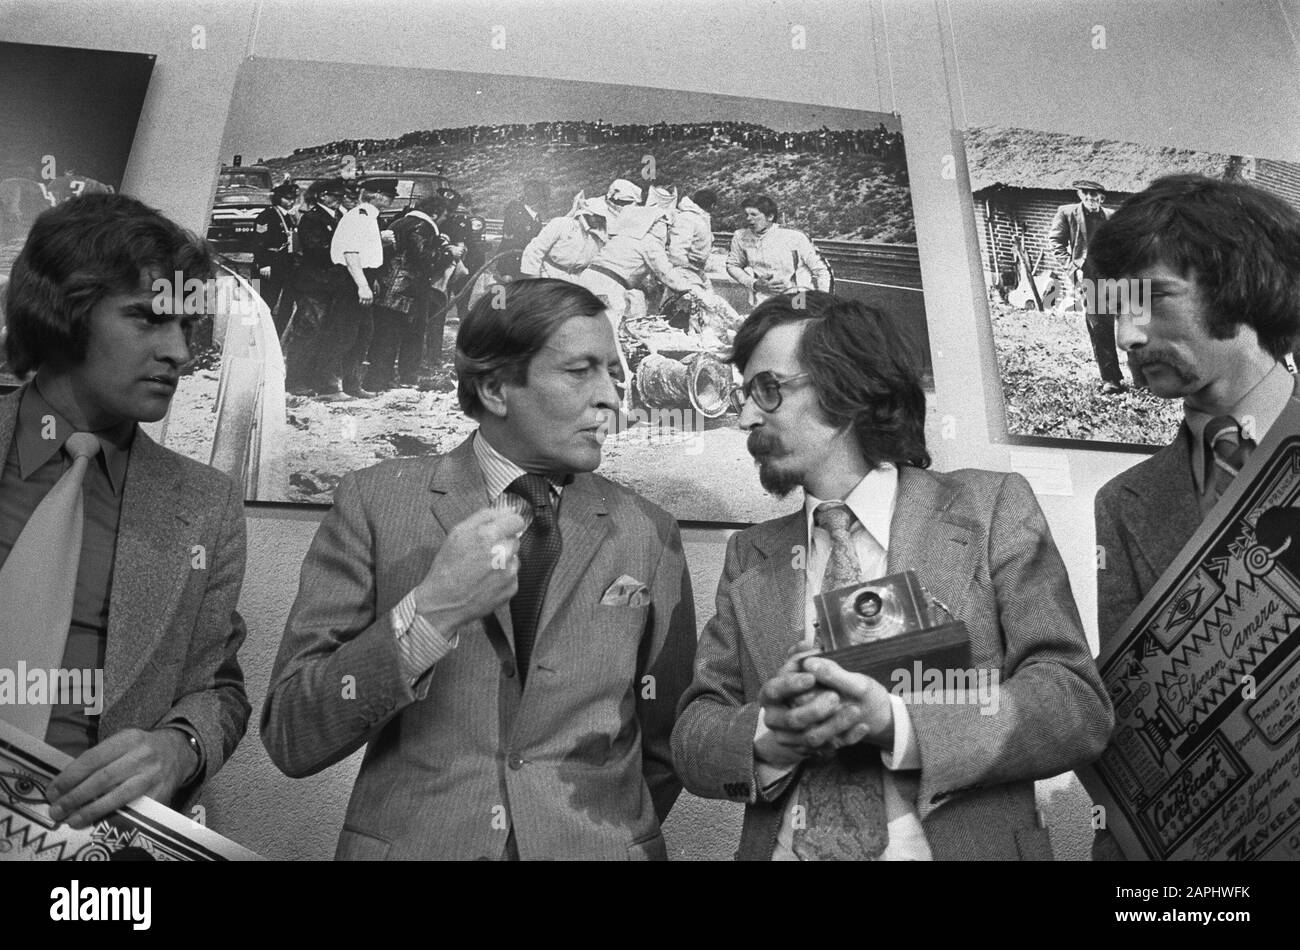 Prince Claus presents the Silver Camera to Rob Mieremet for the best Dutch press photo of 1973 Description: The prince in conversation with the winner Date: 22 November 1973 Location: Amsterdam, Noord-Holland Keywords: photos, photographers, photo contests, press photography, princes Personal name: Claus, prince, Mieremet, Rob Stock Photo